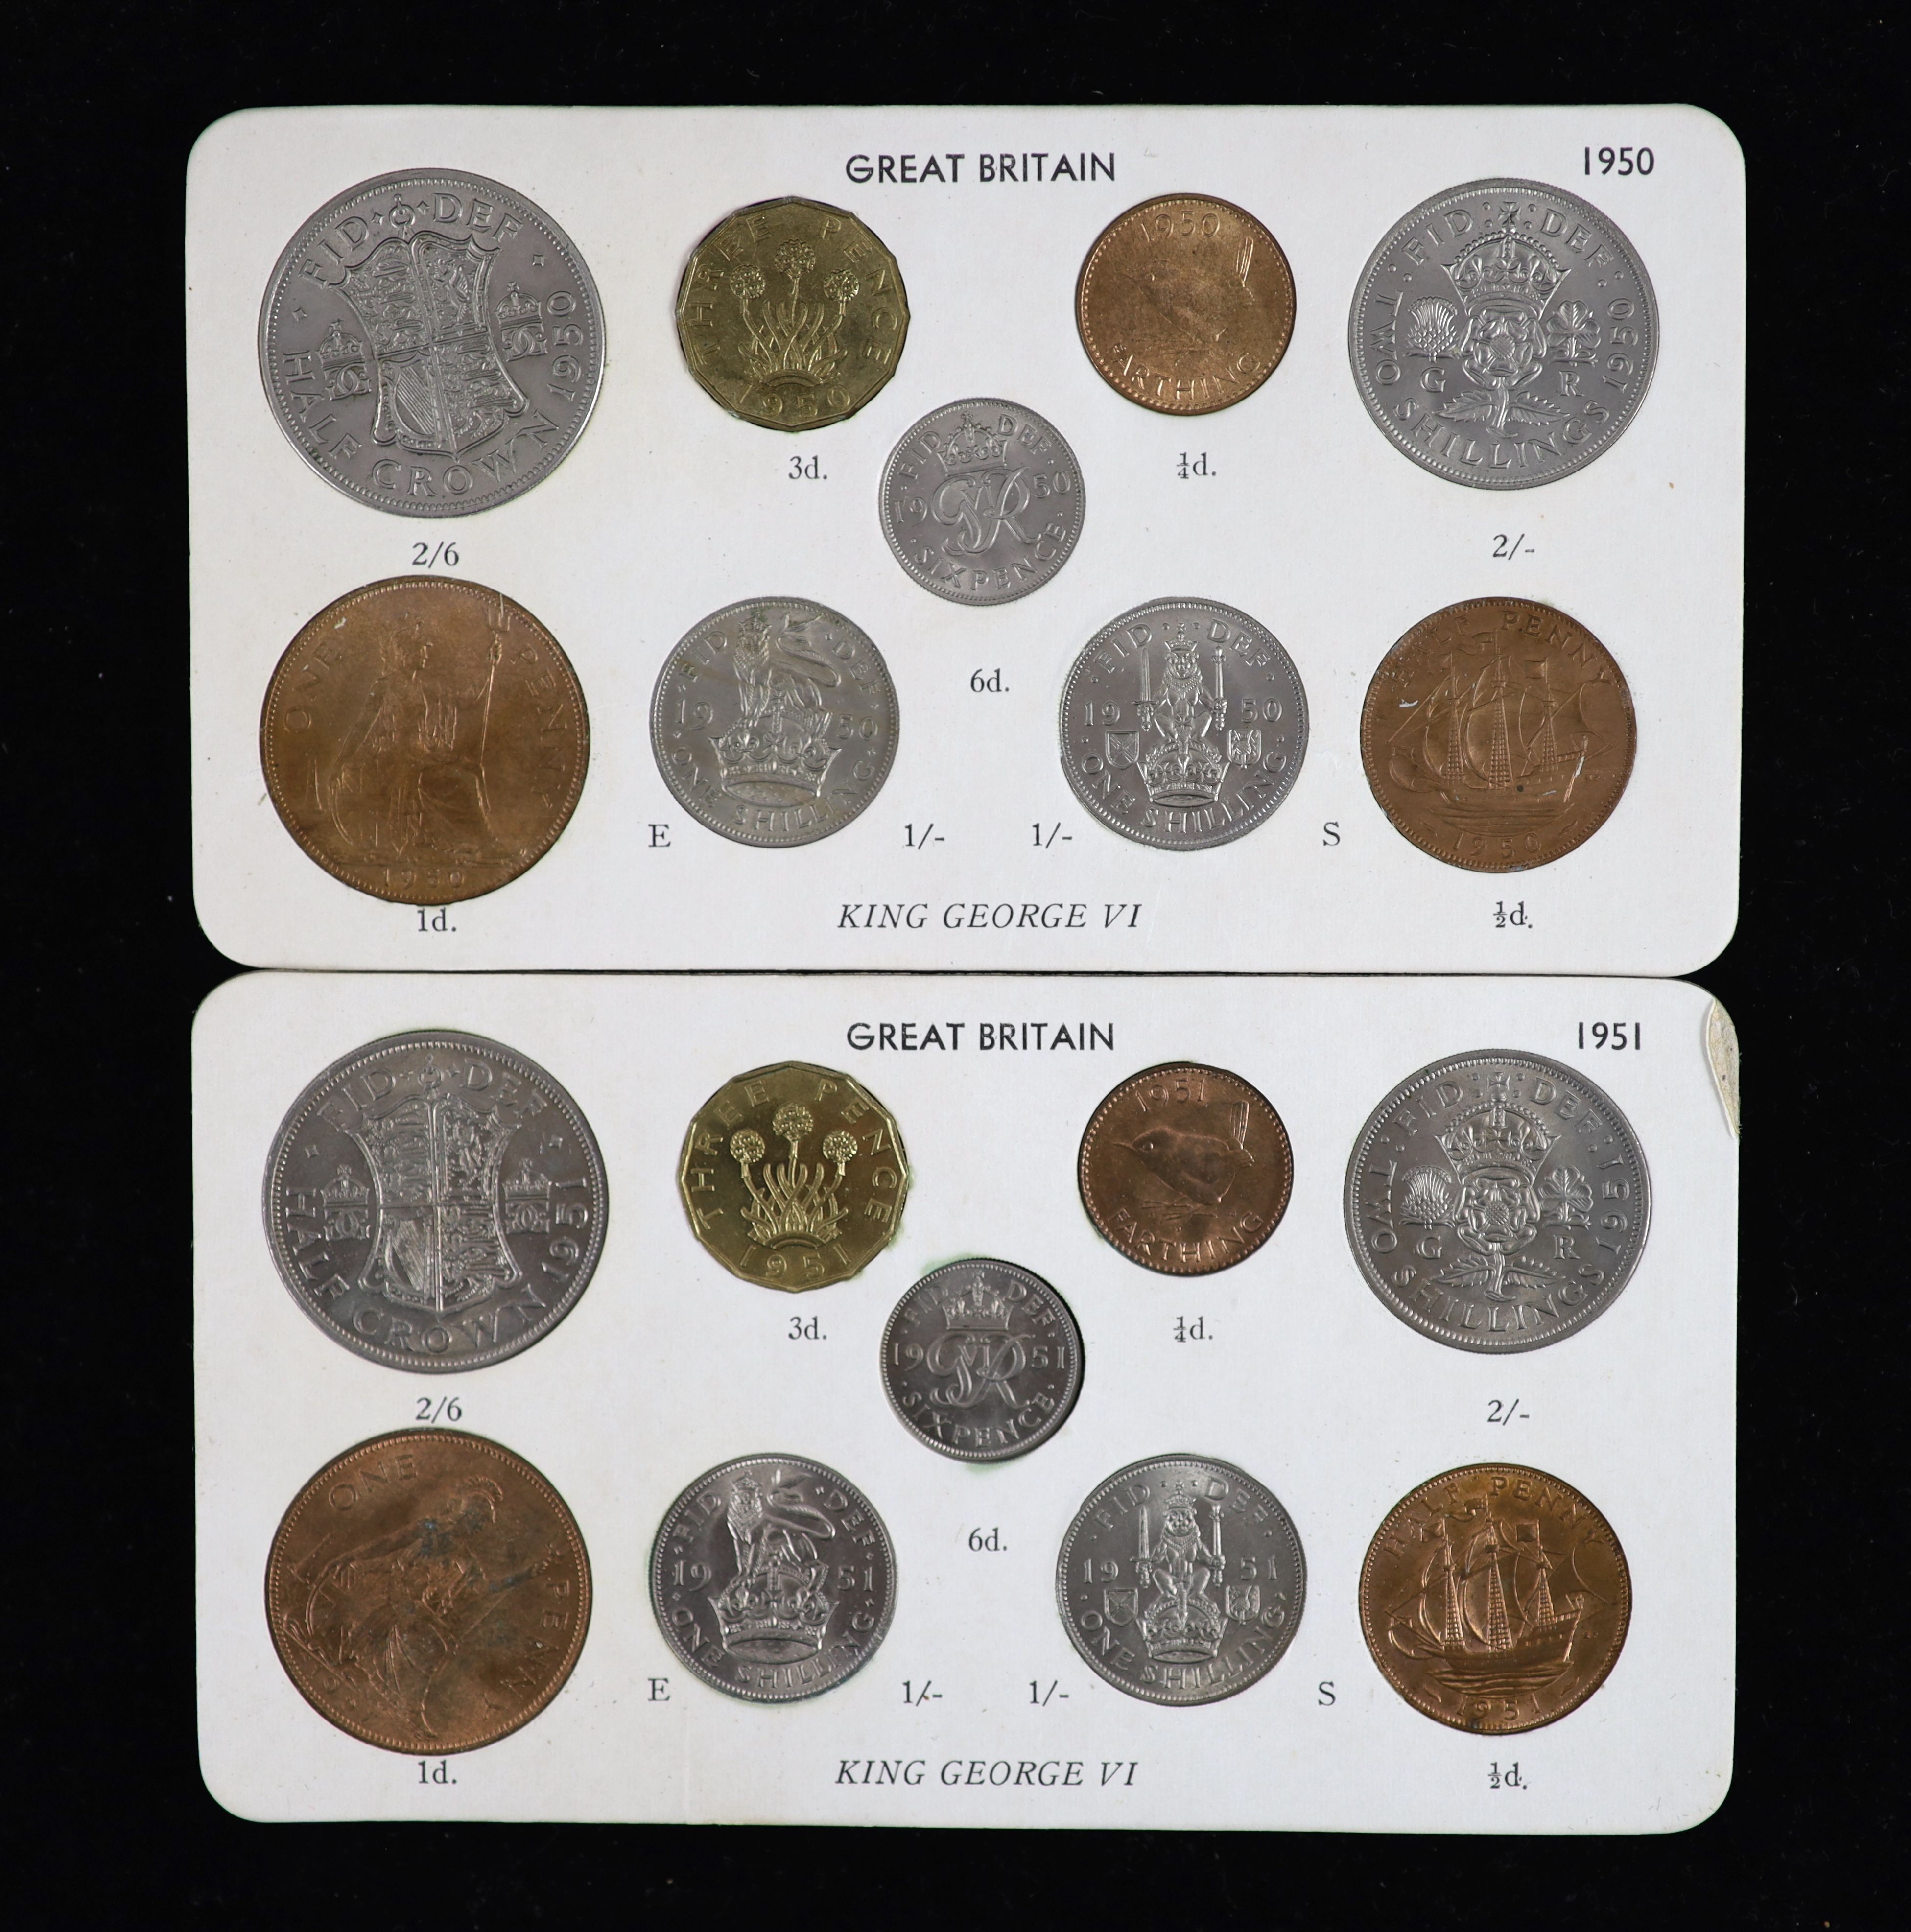 George VI specimen coin sets for 1950 and 1951, second issue, including 1950 threepence, aUNC, 1951 threepence and penny, both EF